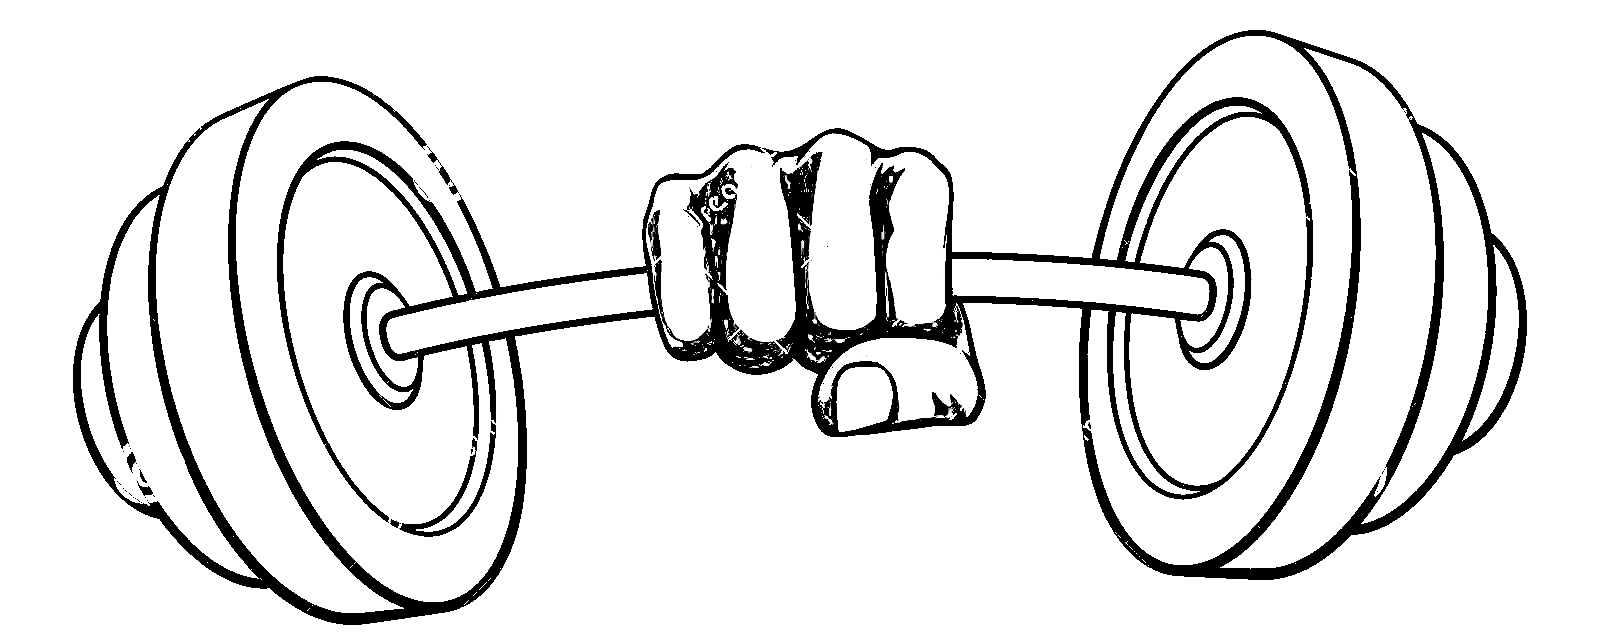 Weight Lifting Fist Hand Holding